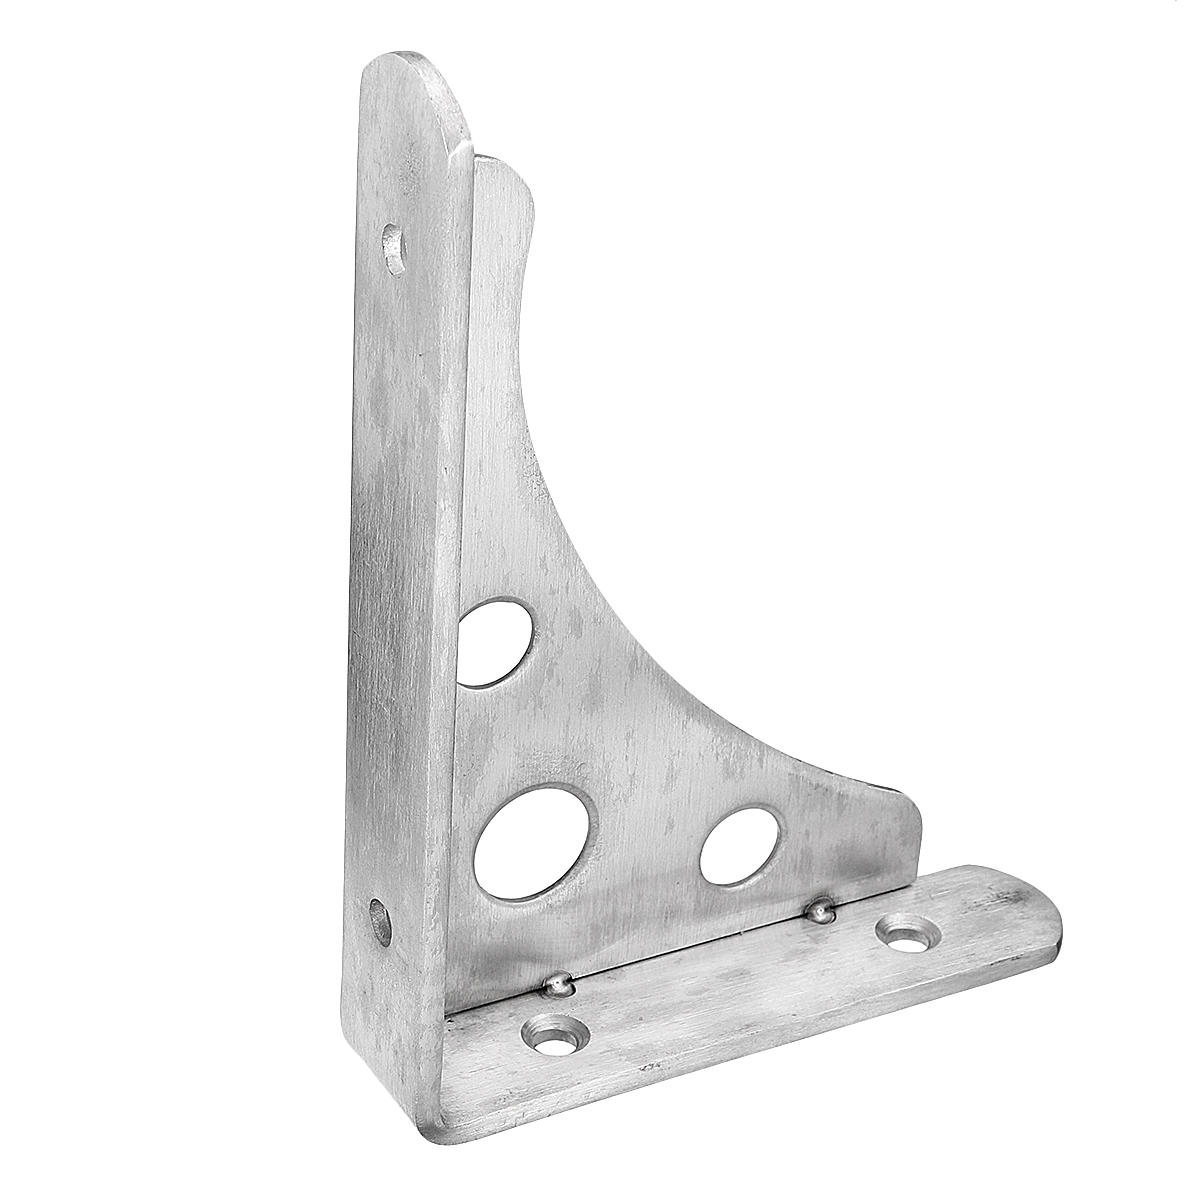 Thick Stainless Steel Bracket Partition Load Bearing Bracket Side Left And Right Tripod Shelf Rack